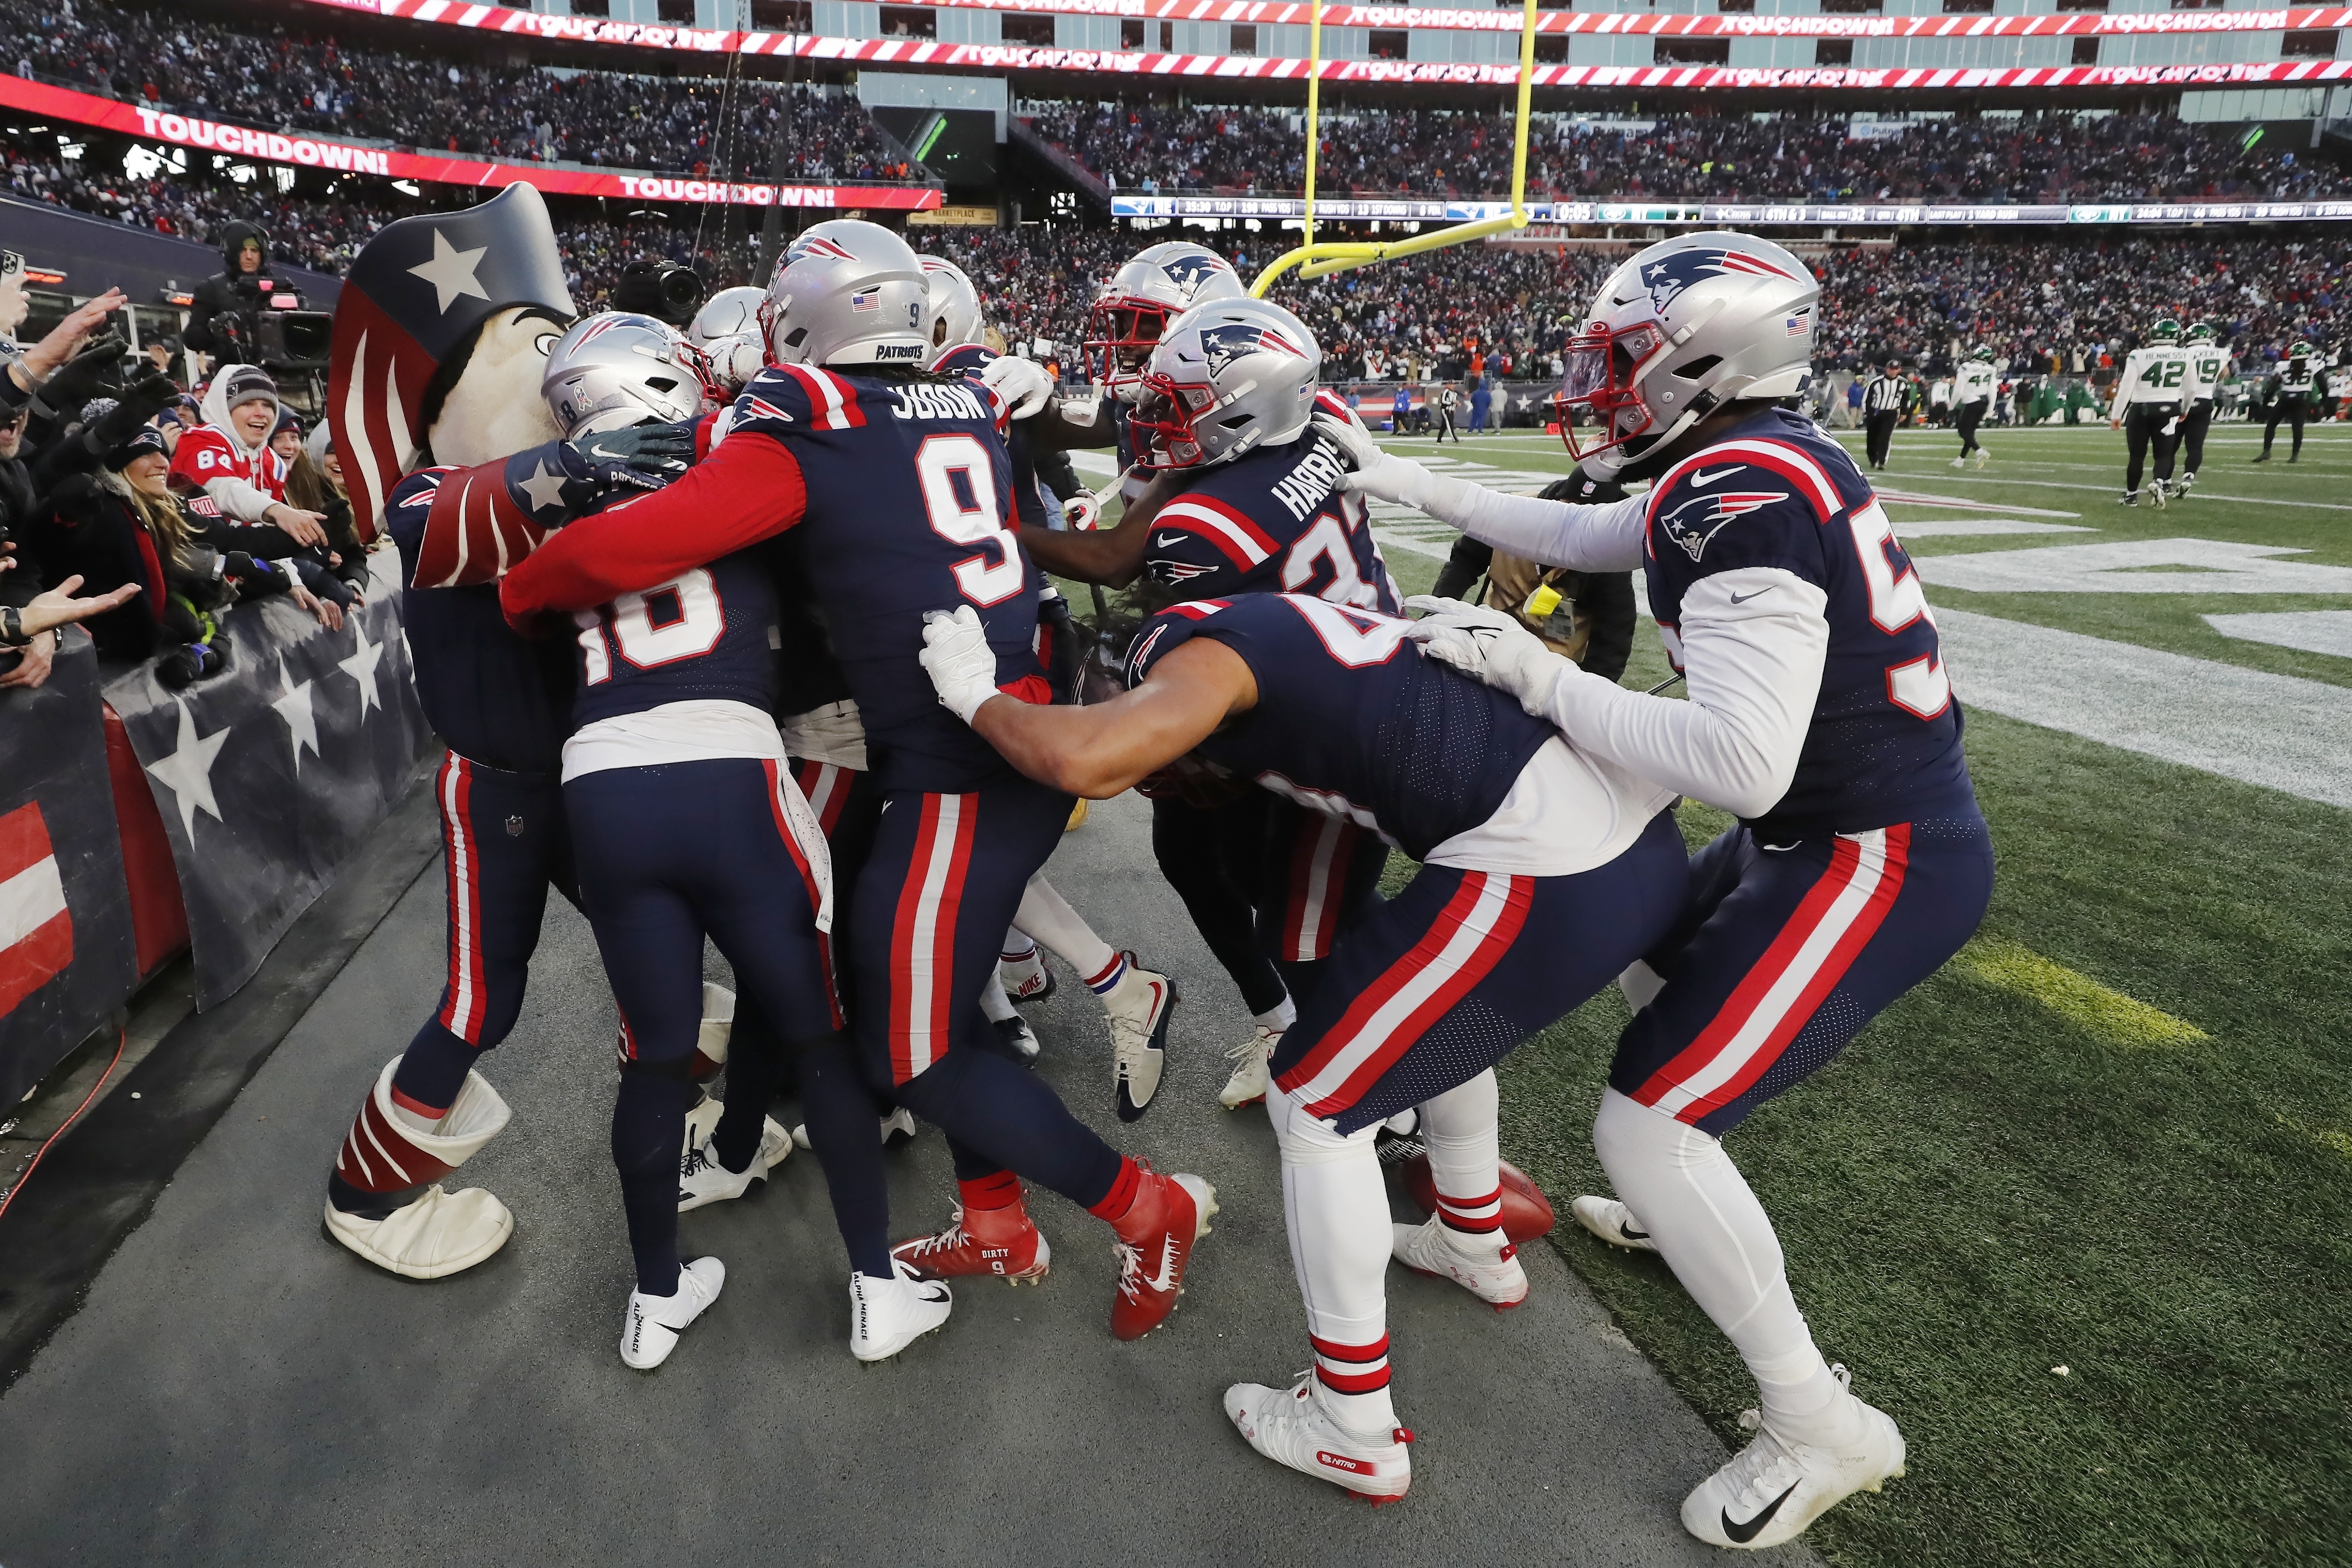 Dan Shaughnessy: What should we make of these Patriots?